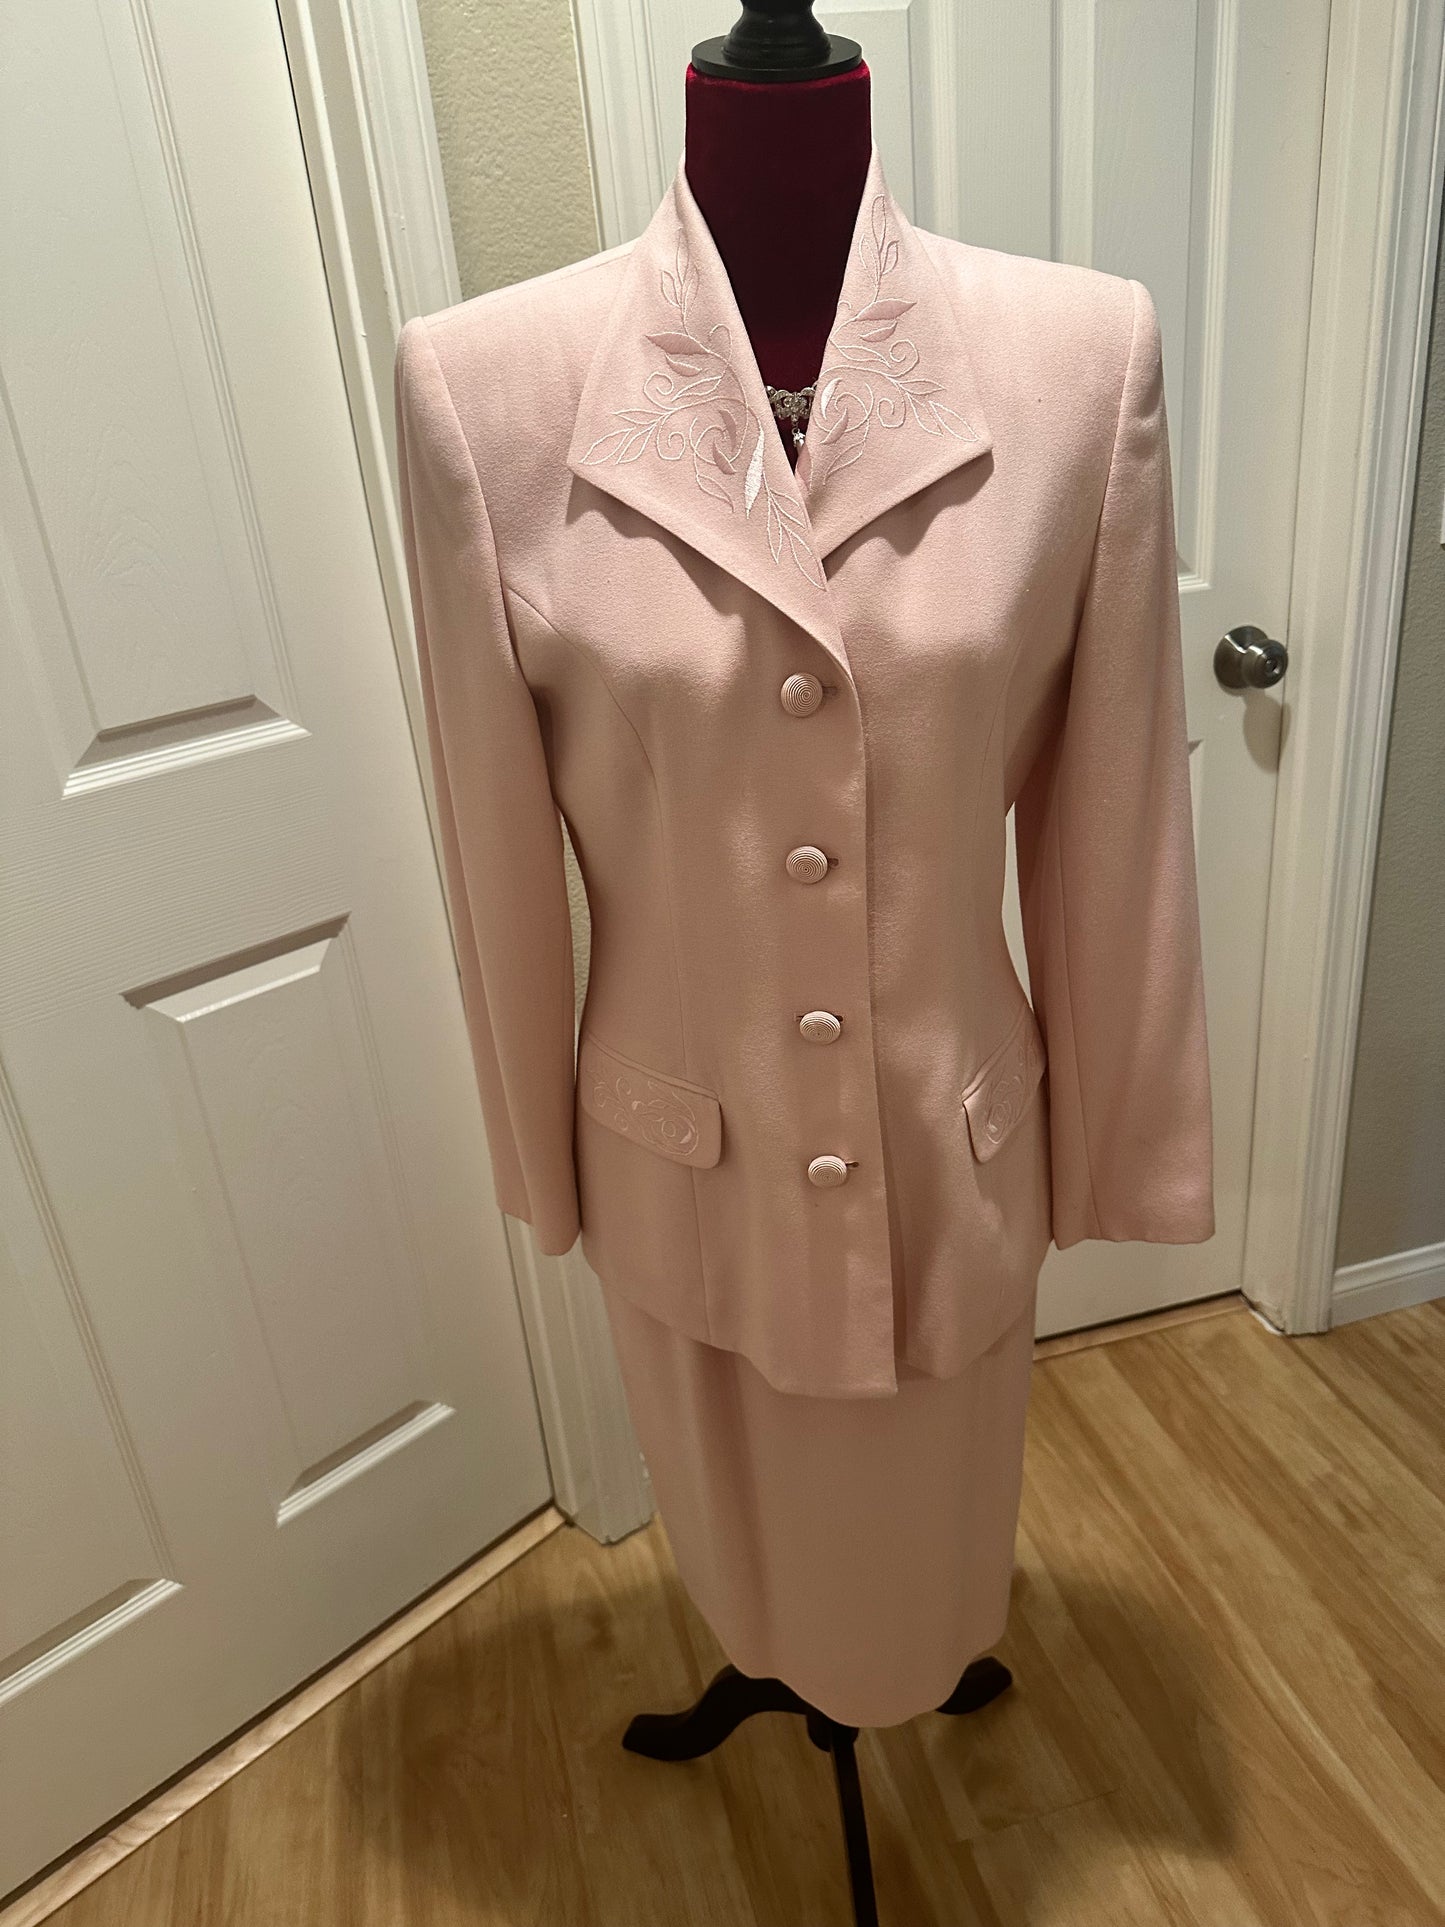 Stunning Casual Corner Two-Piece Dress Suit, US Size 10